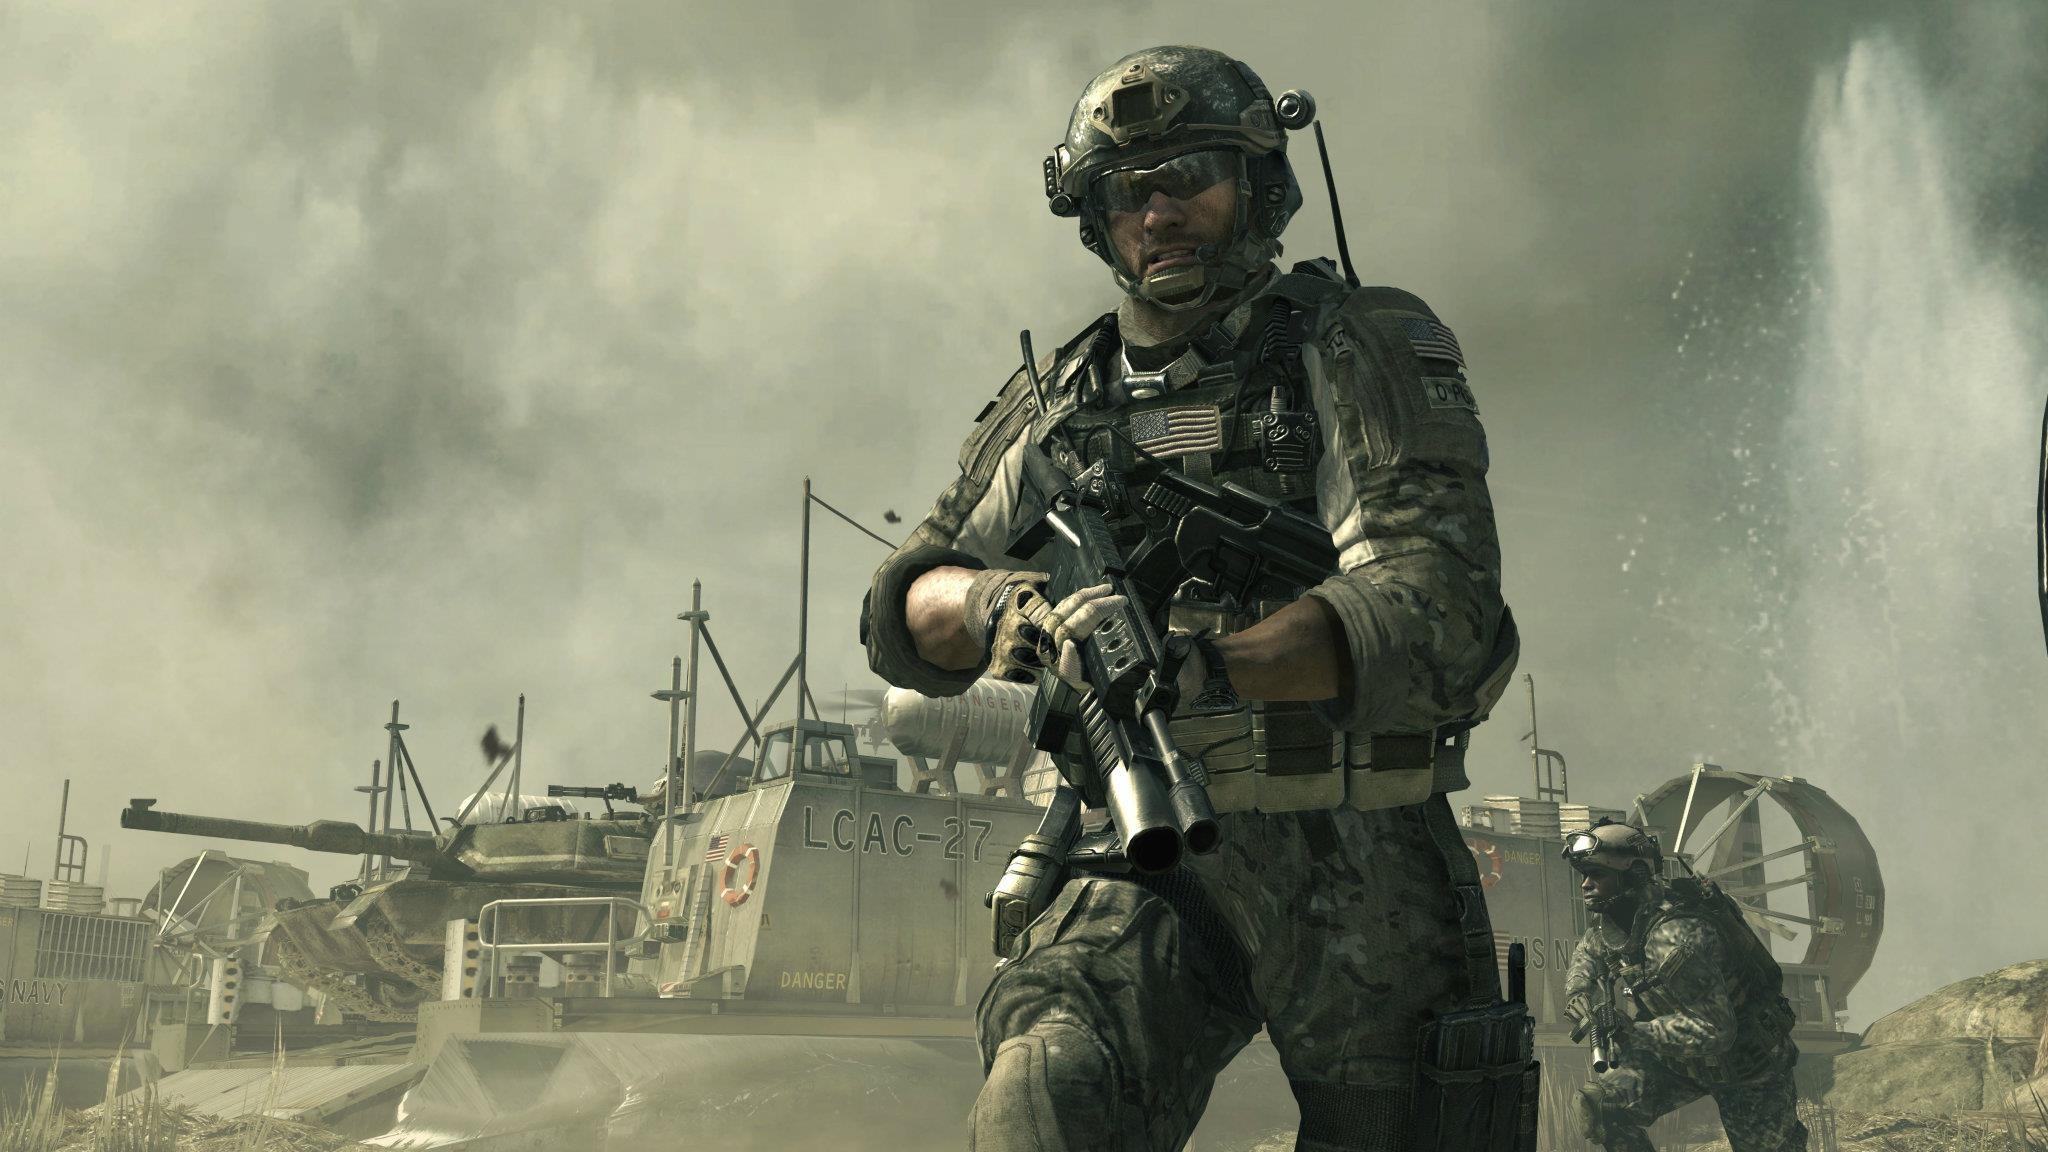 Call of Duty Modern Warfare 3 Wallpaper background picture